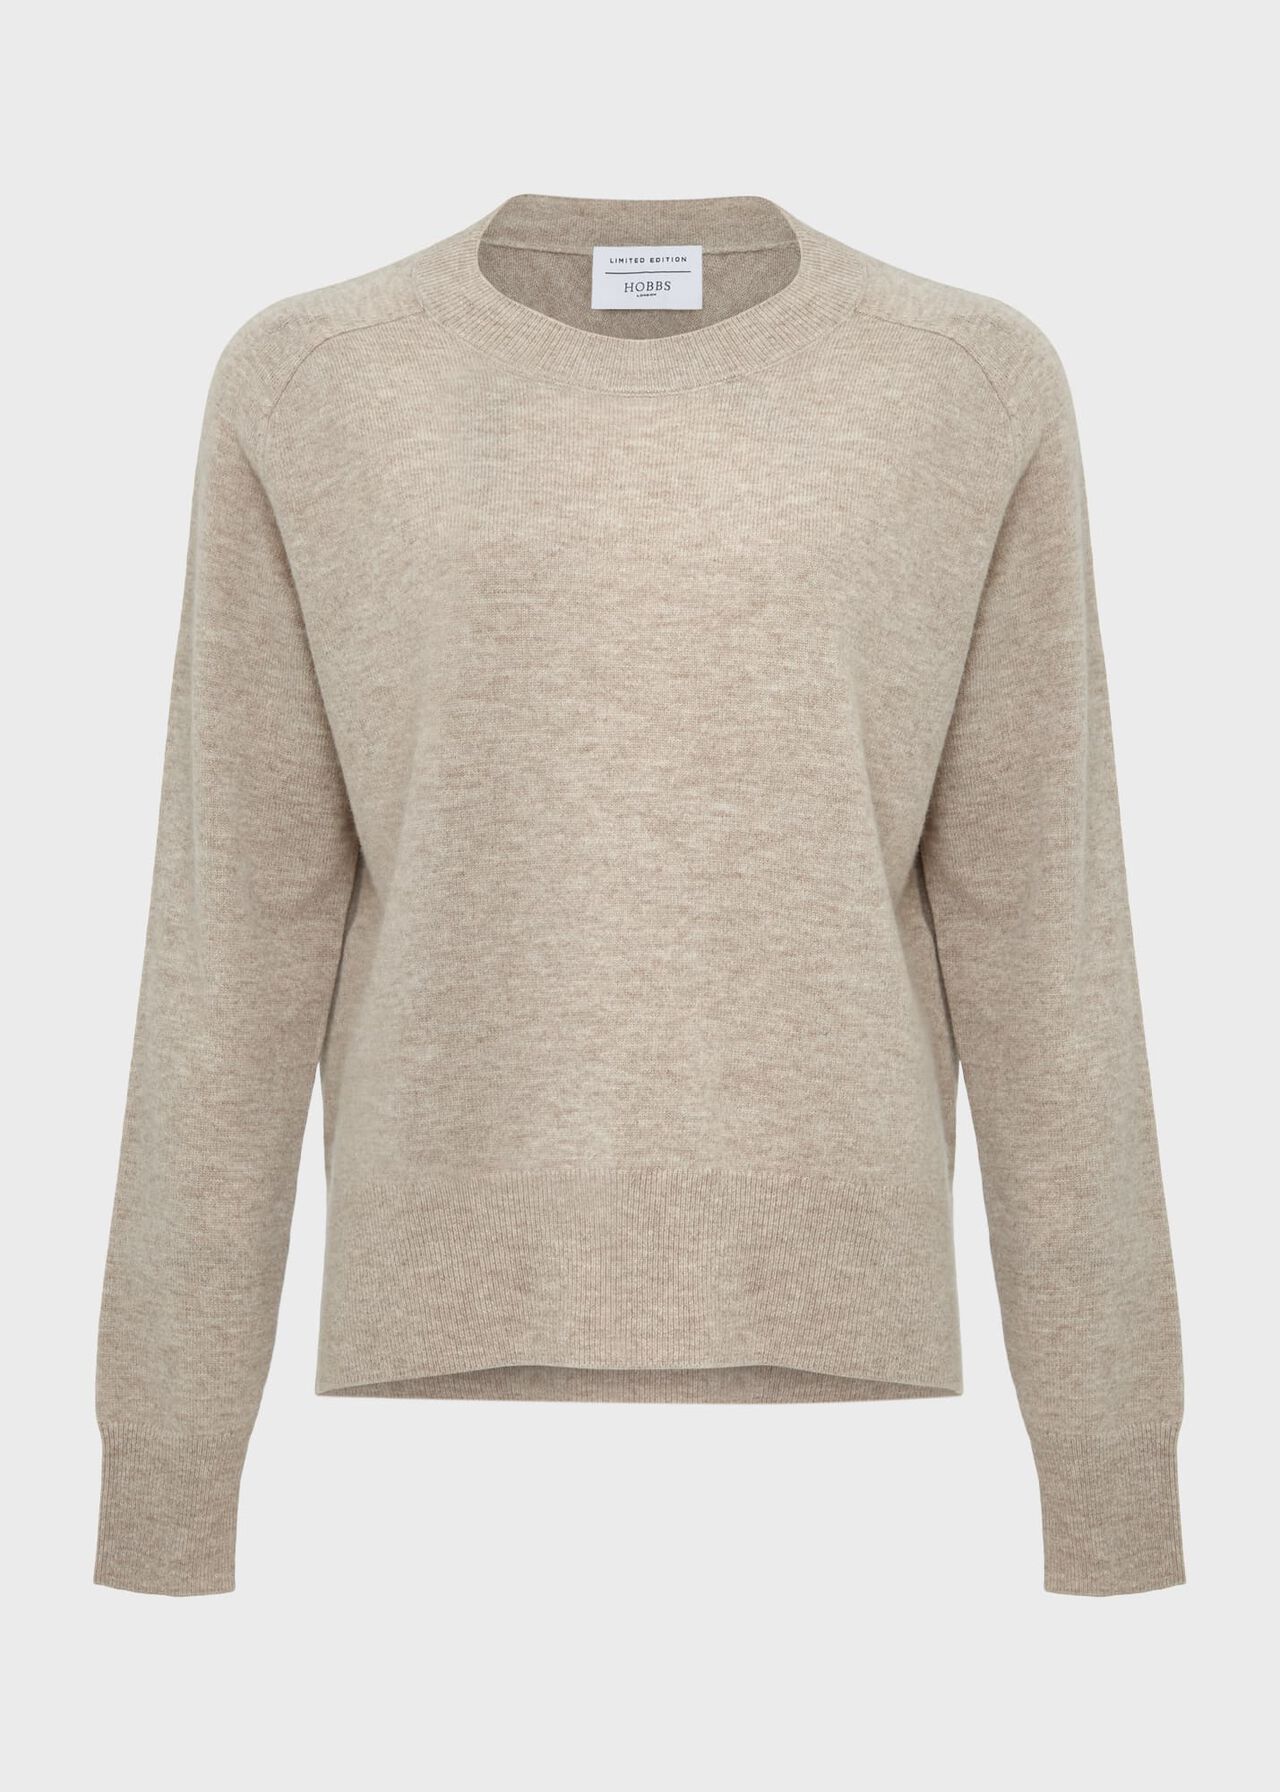 Miller Sweater With Cashmere, Camel Marl, hi-res